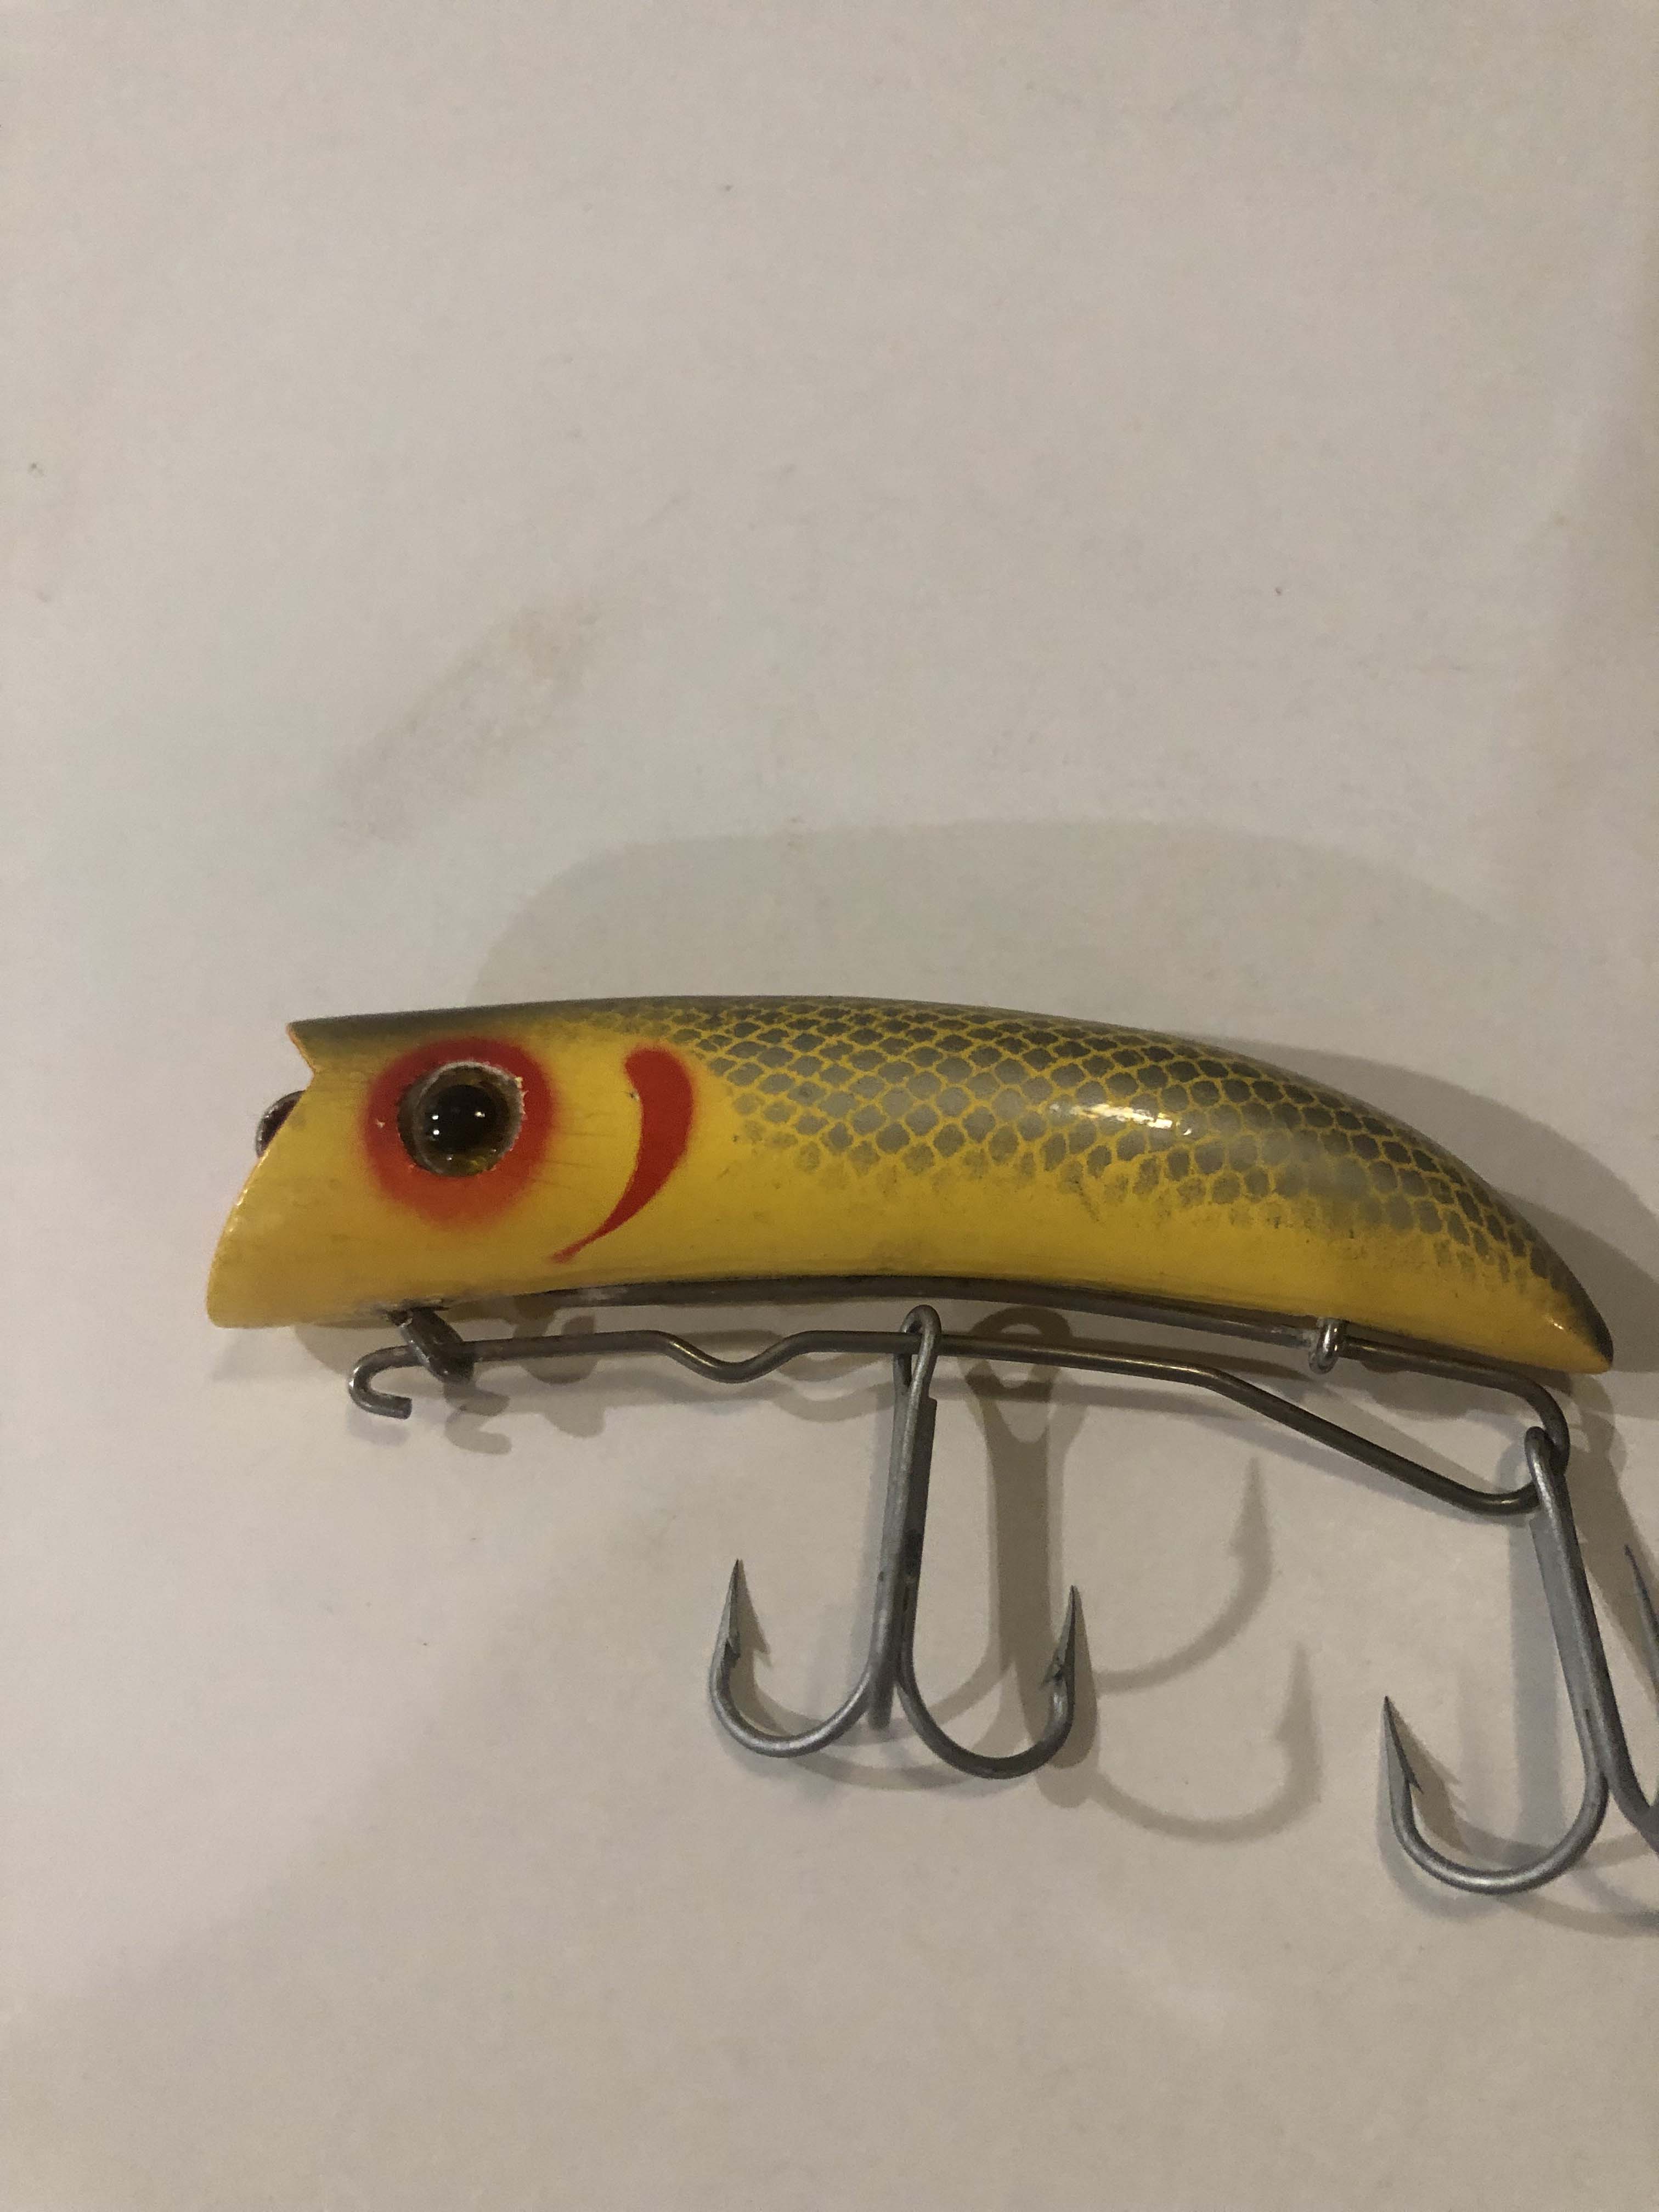 HARD TO FIND 40'S NELSON WILD ACTION BANANA LURE